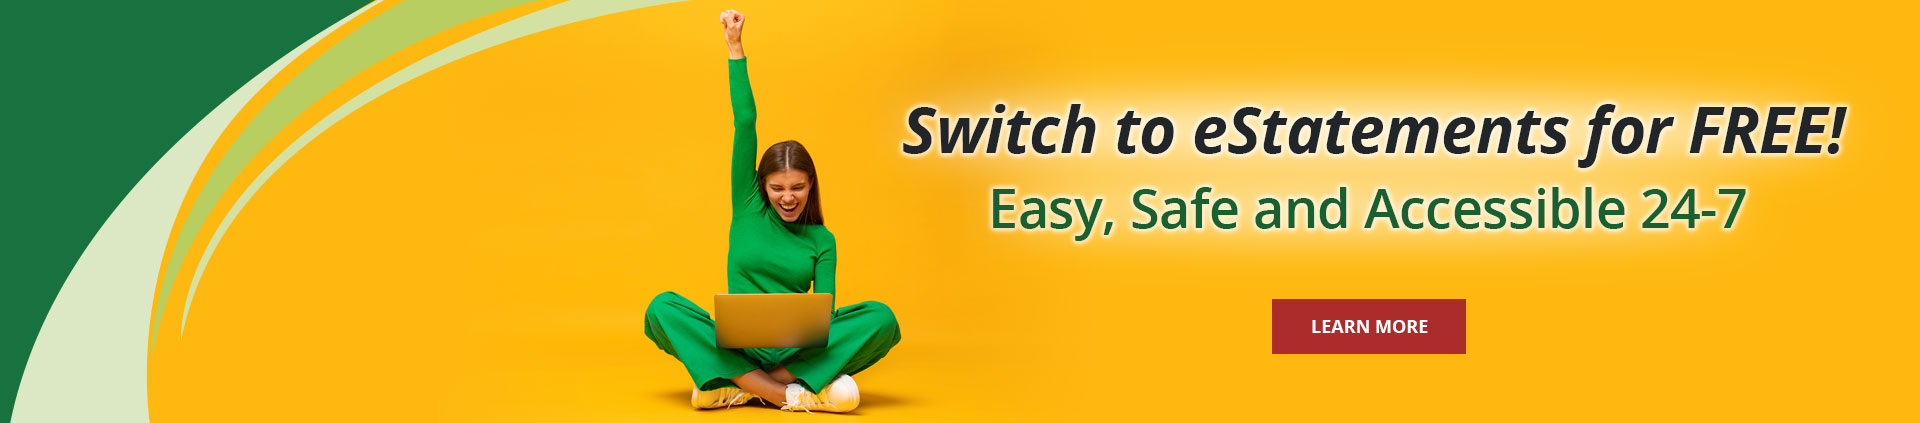 Switch to eStatements for free! Easy, safe and accessible 24-7. Learn More